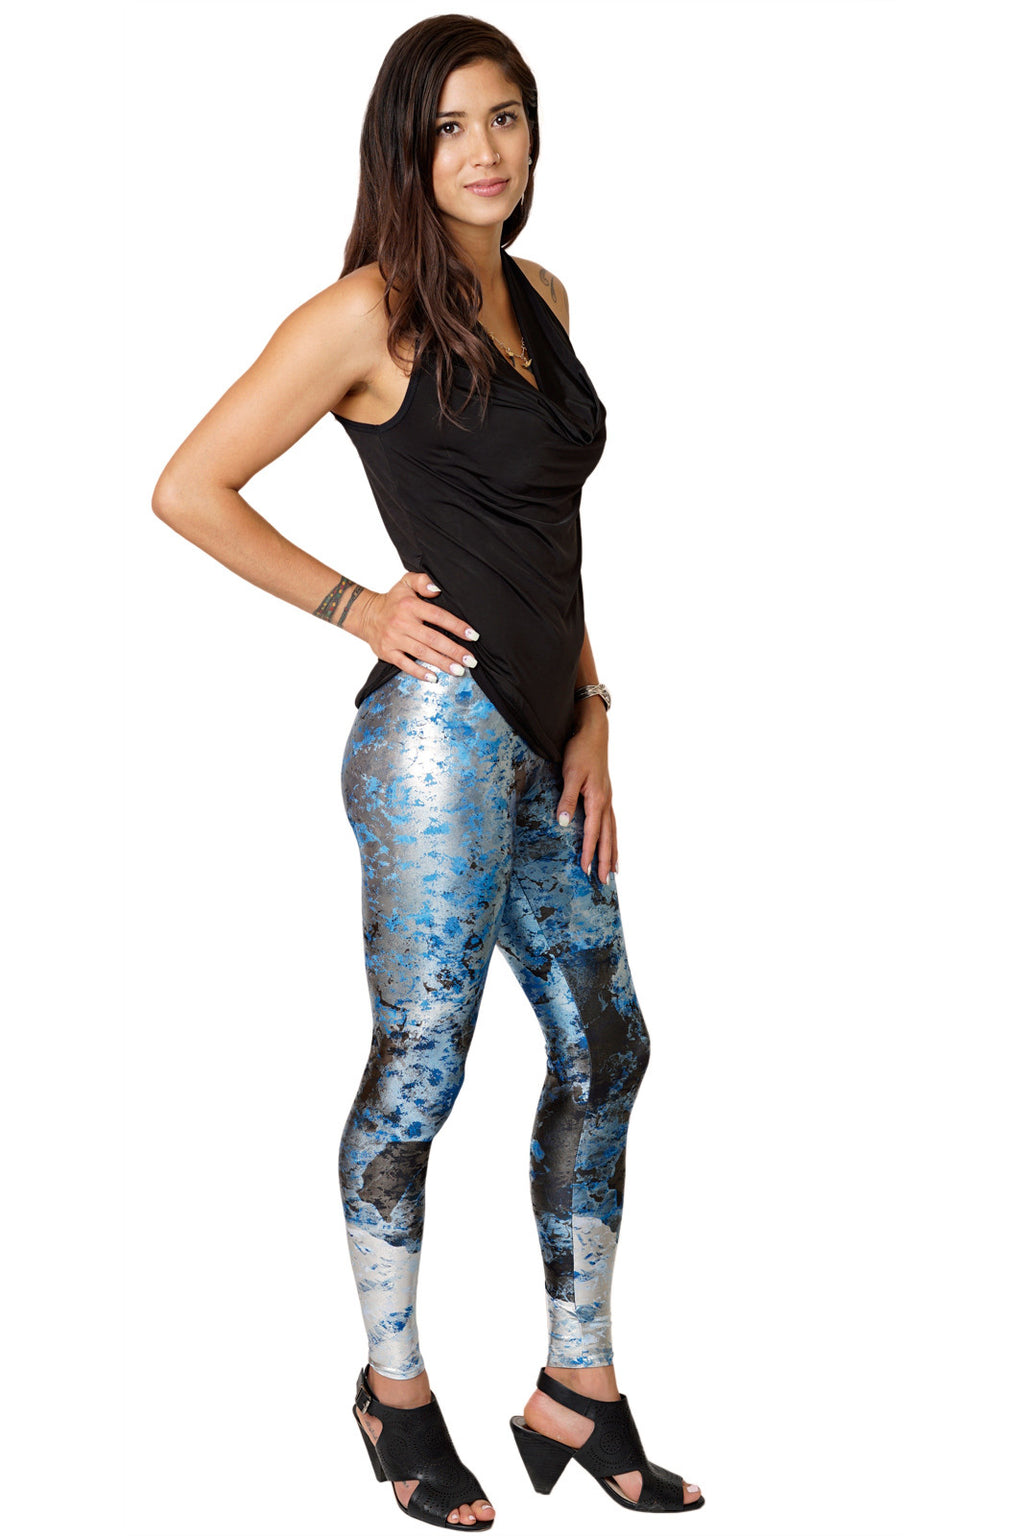 Leggings - Colorful Nature Inspired Athletic Fashion -